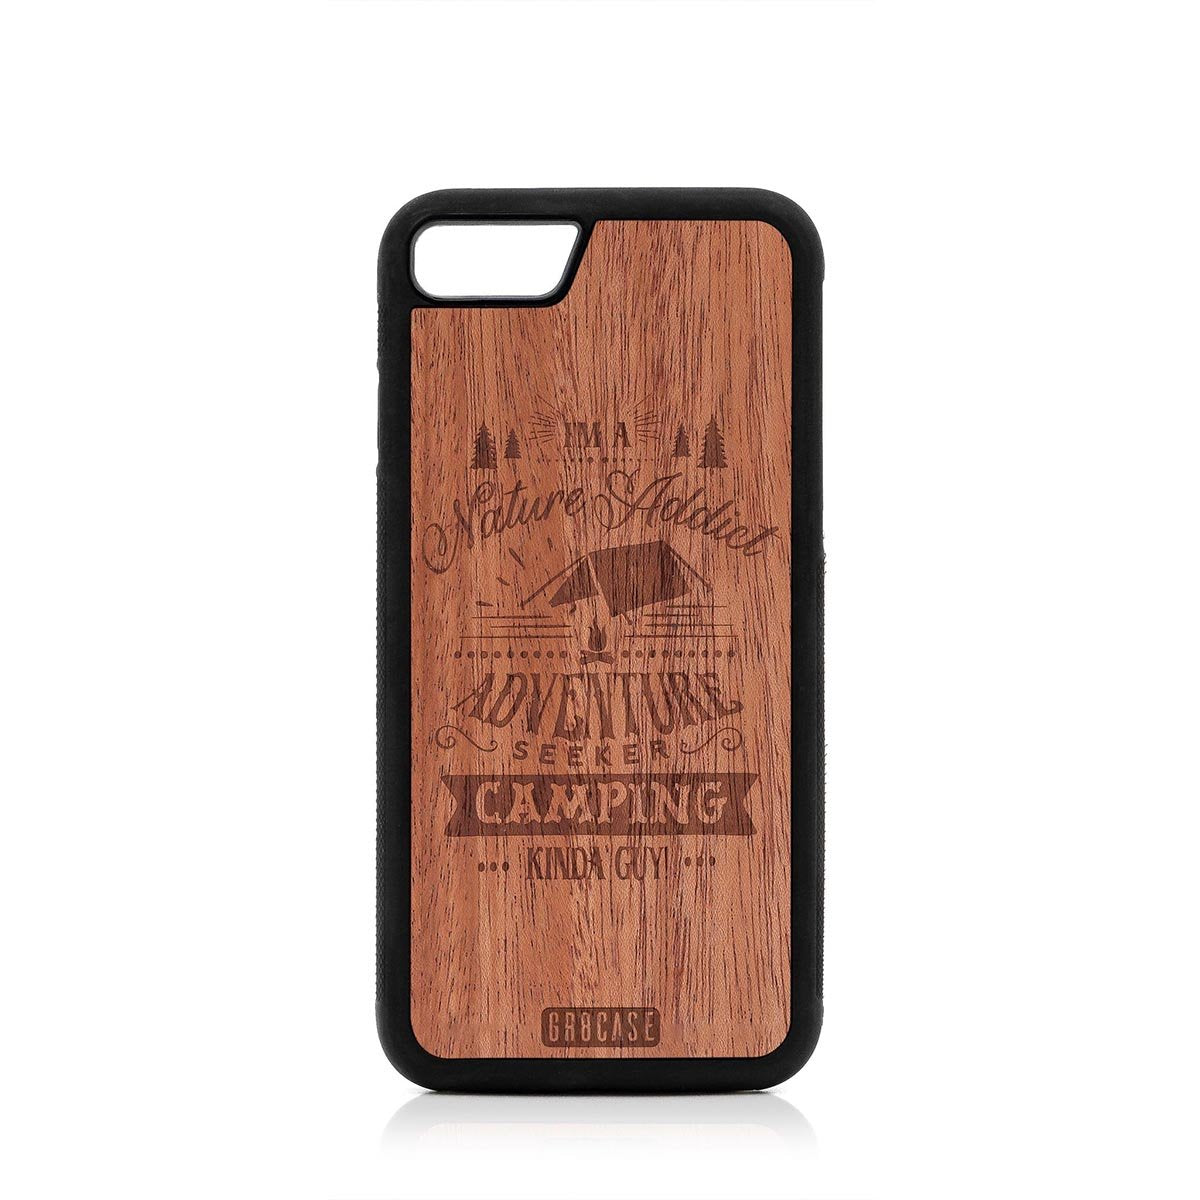 I'm A Nature Addict Adventure Seeker Camping Kinda Guy Design Wood Case For iPhone SE 2020 by GR8CASE